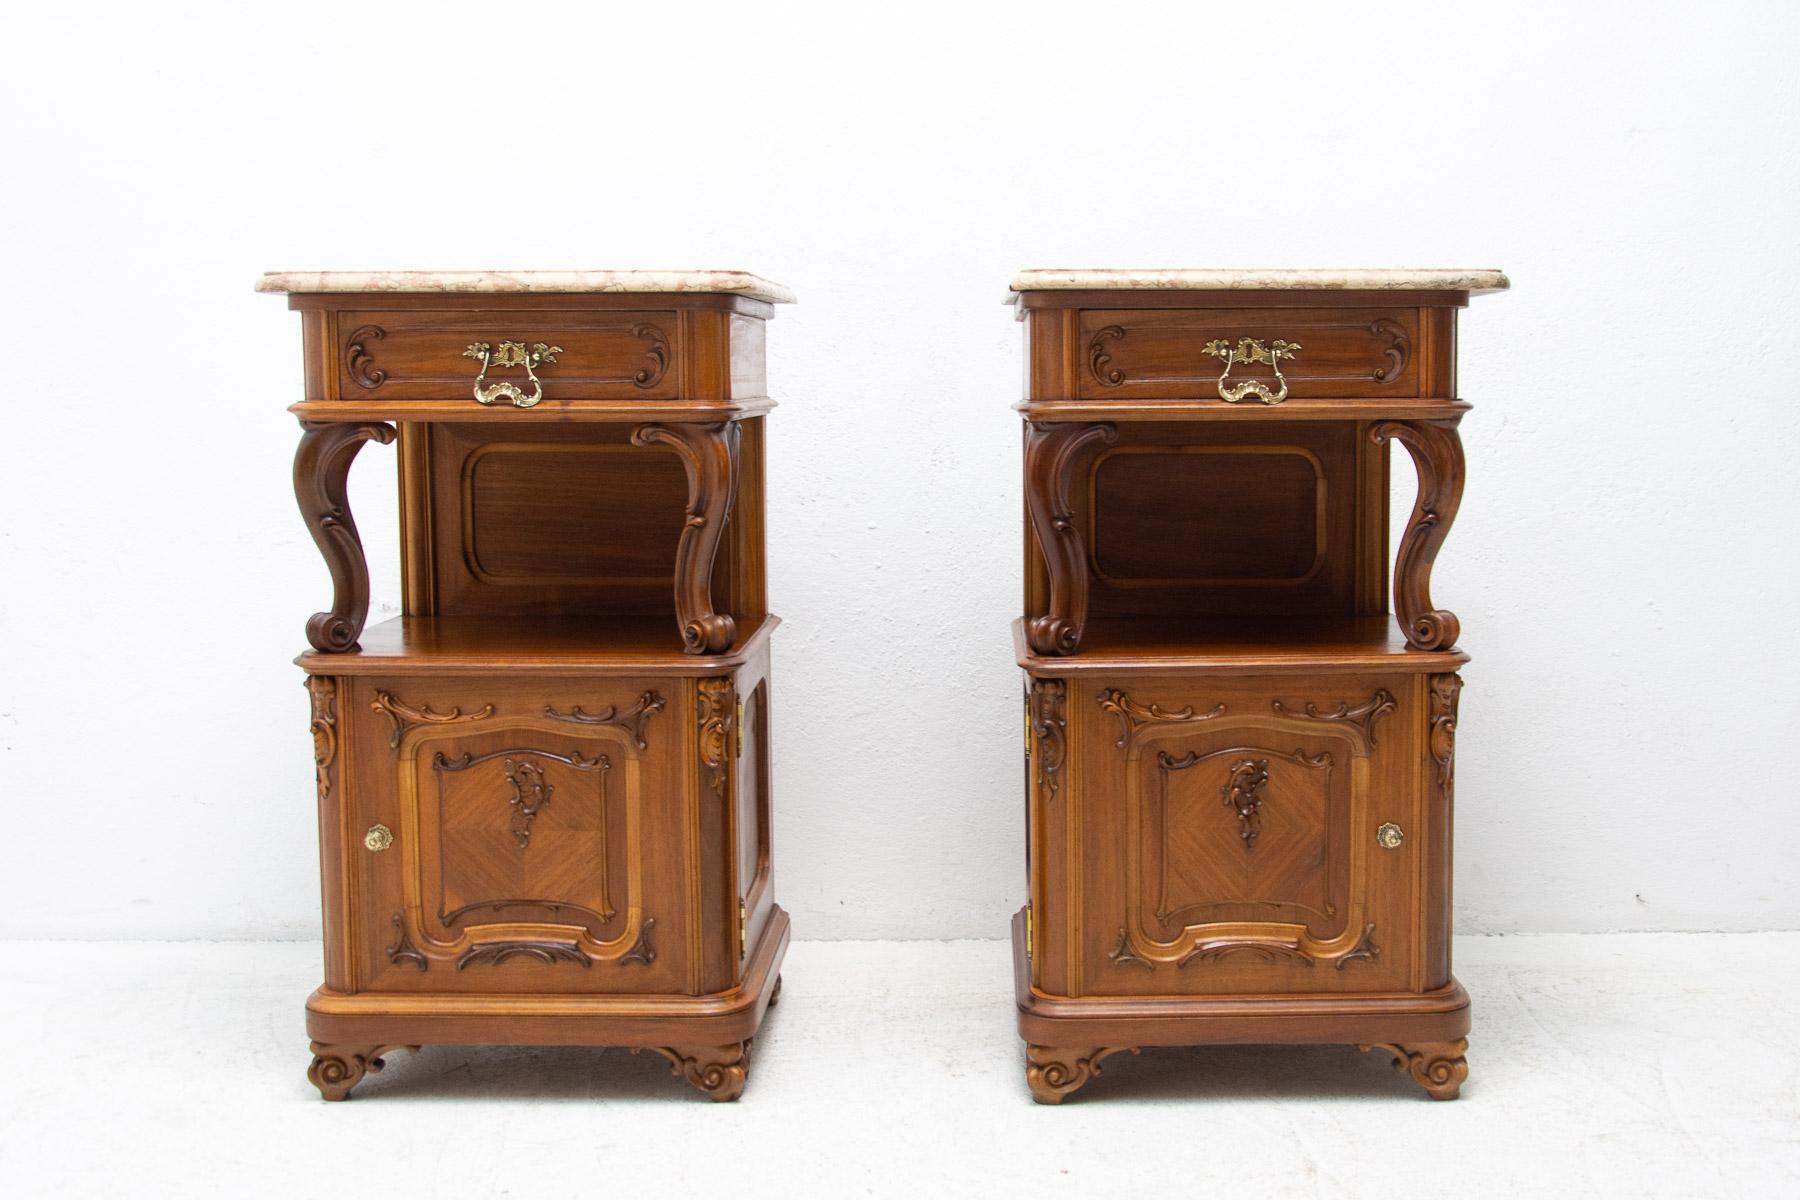 A pair of the bedside tables in the historicist style, made in the Austria-Hungary empire around 1910.
It´s made of beech wood.
Marble panel on the top. The stands are in excellent condition, completely renovated.

Price is for the